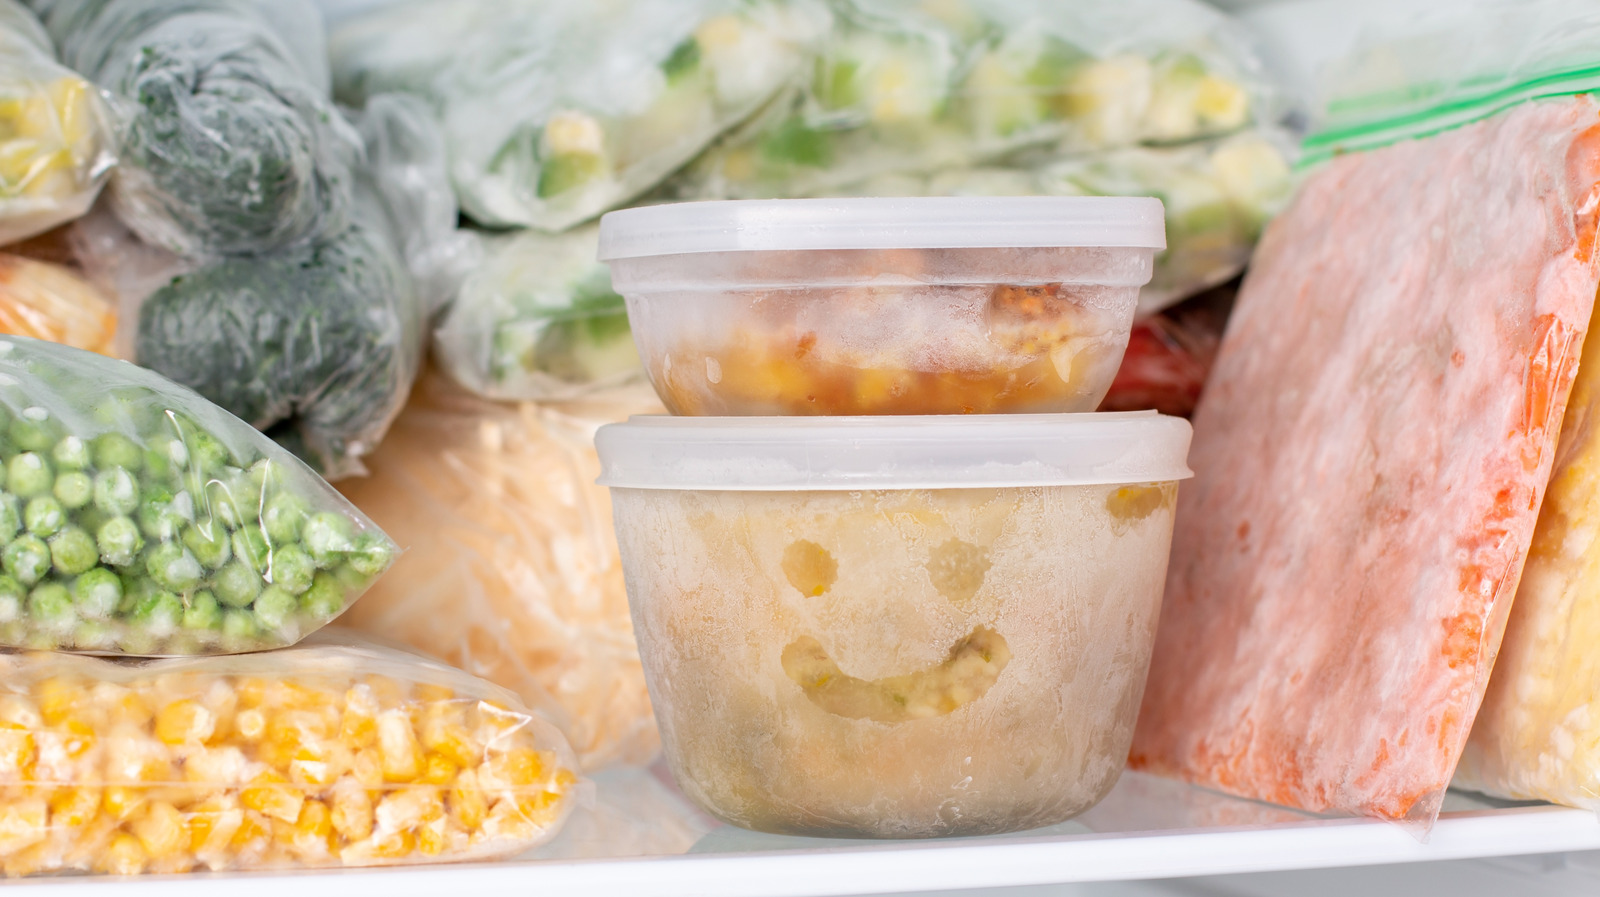 Frozen food in the freezer. Bagged frozen meat and other foods in